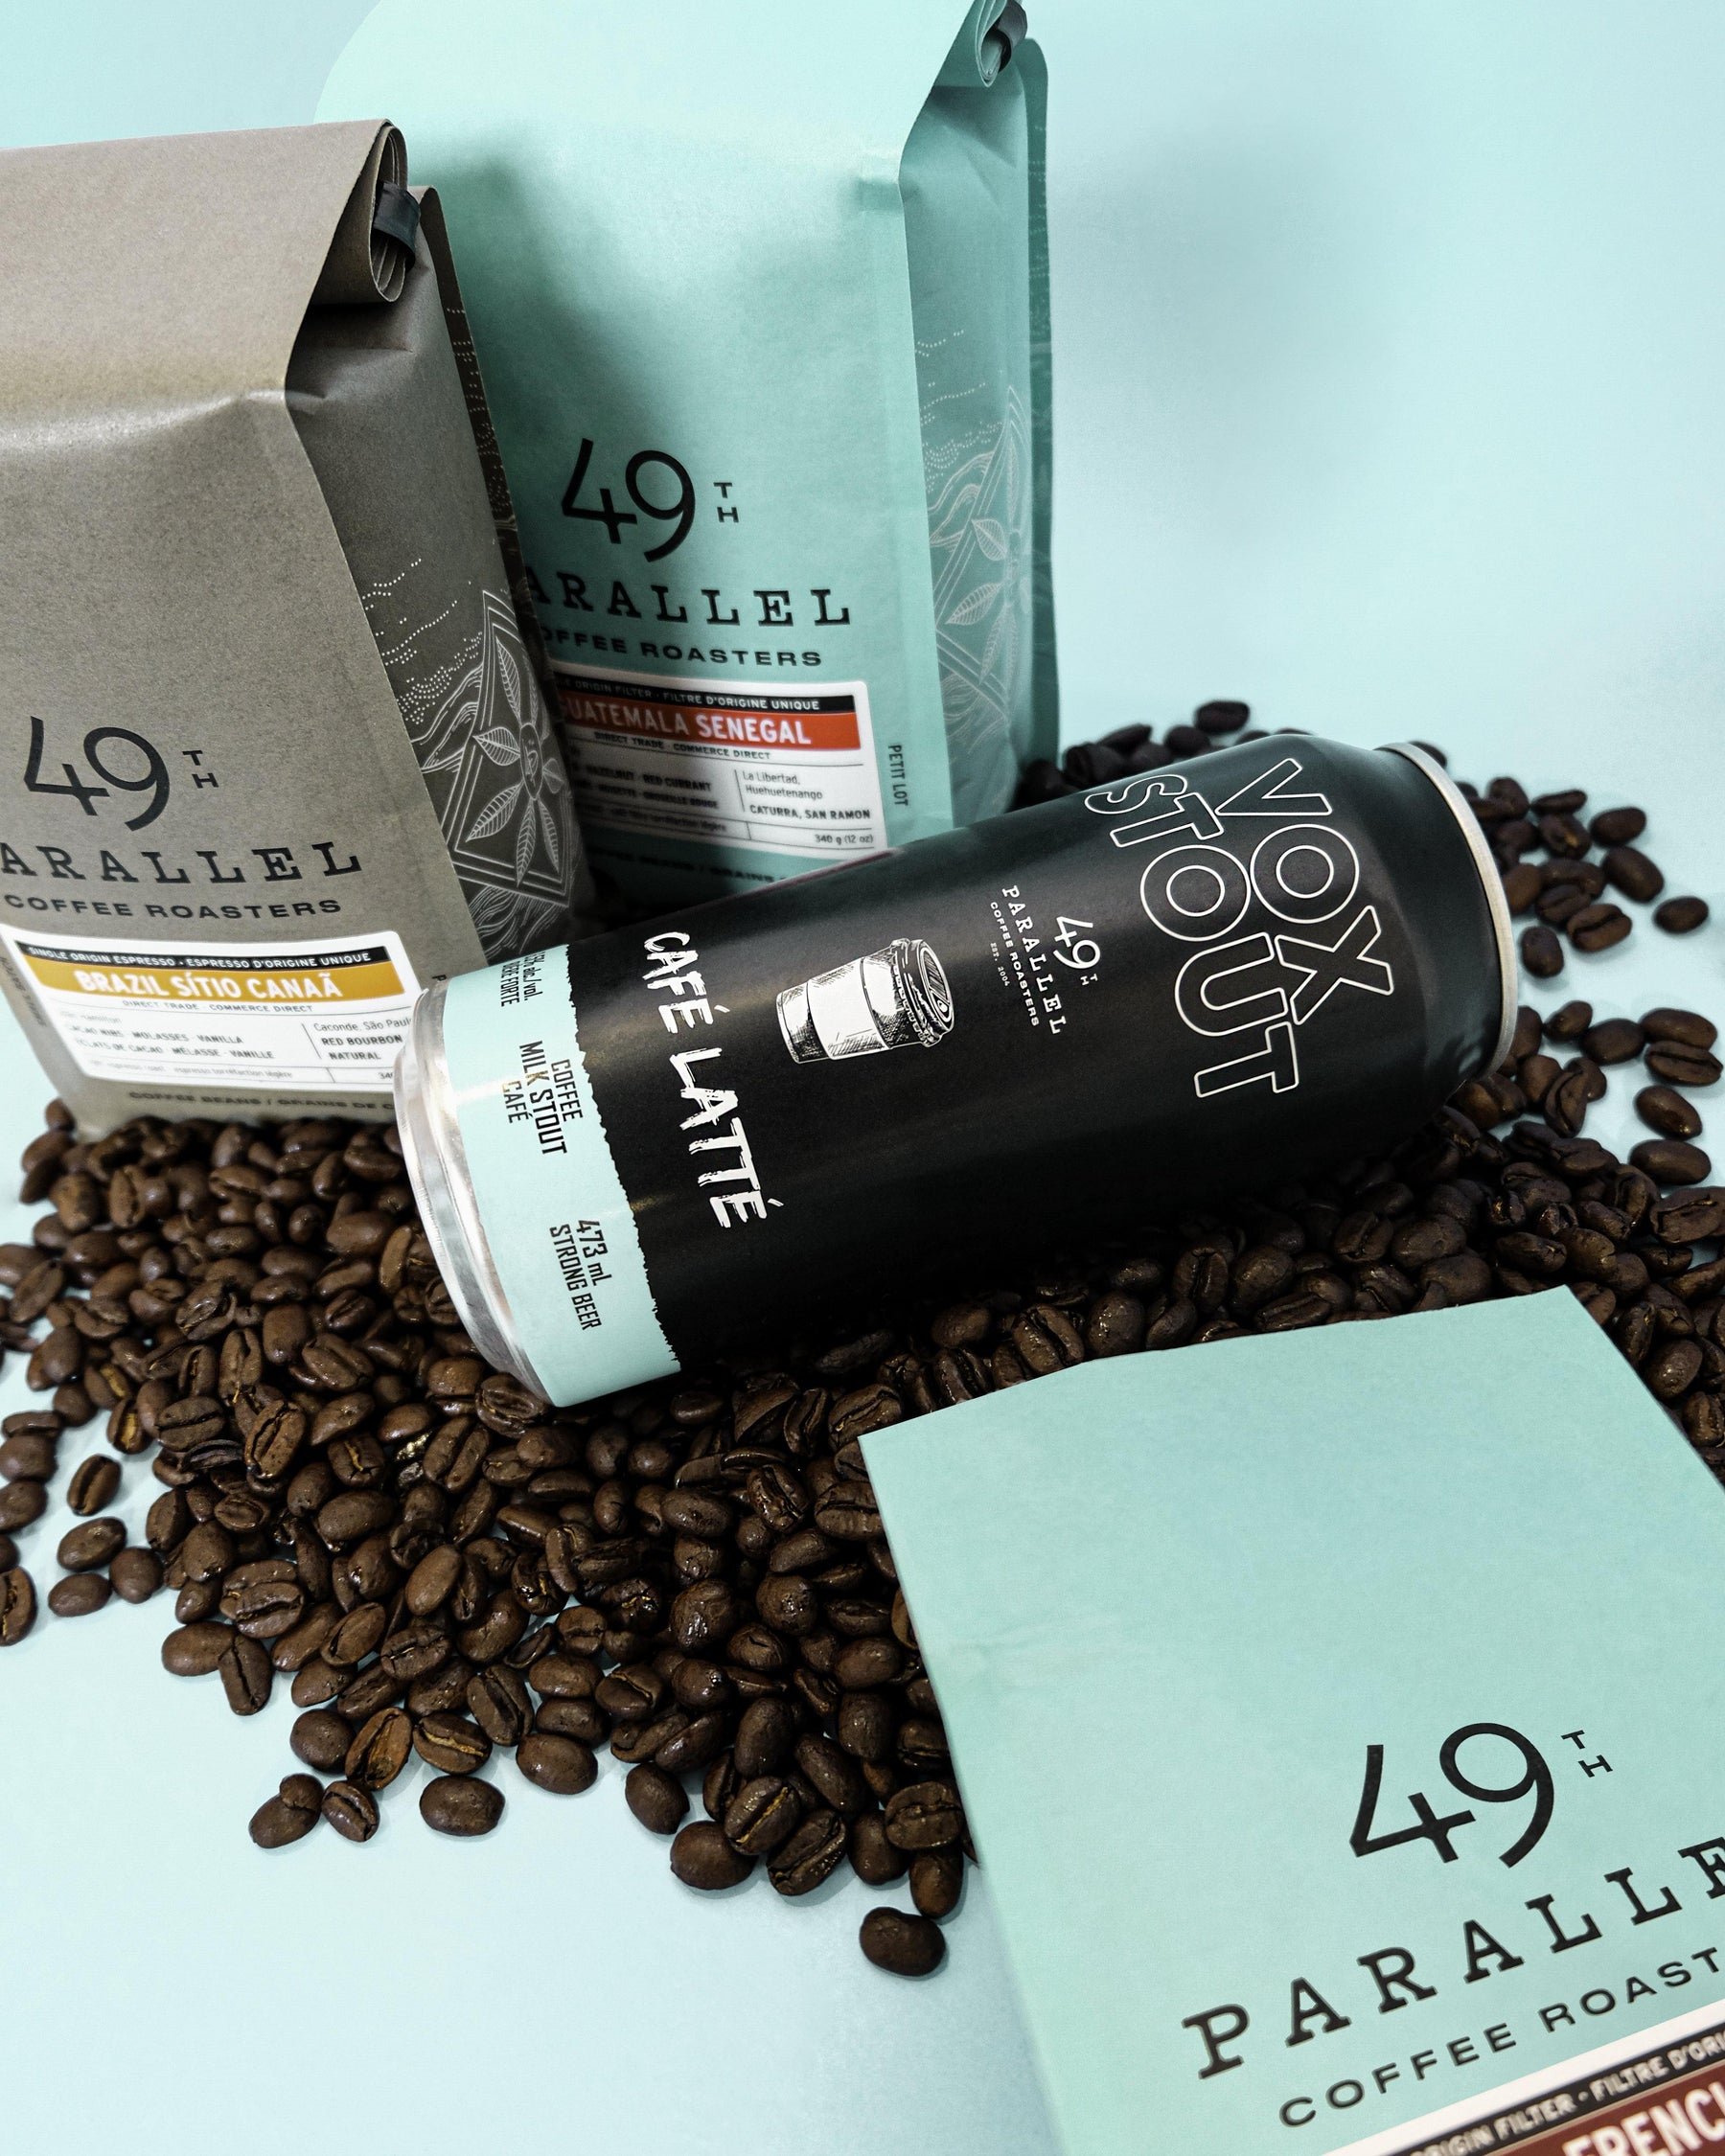 Vox Brewery X 49th Parallel Coffee: Introducing the Vox Stout Café Latte - 49th Parallel Coffee Roasters